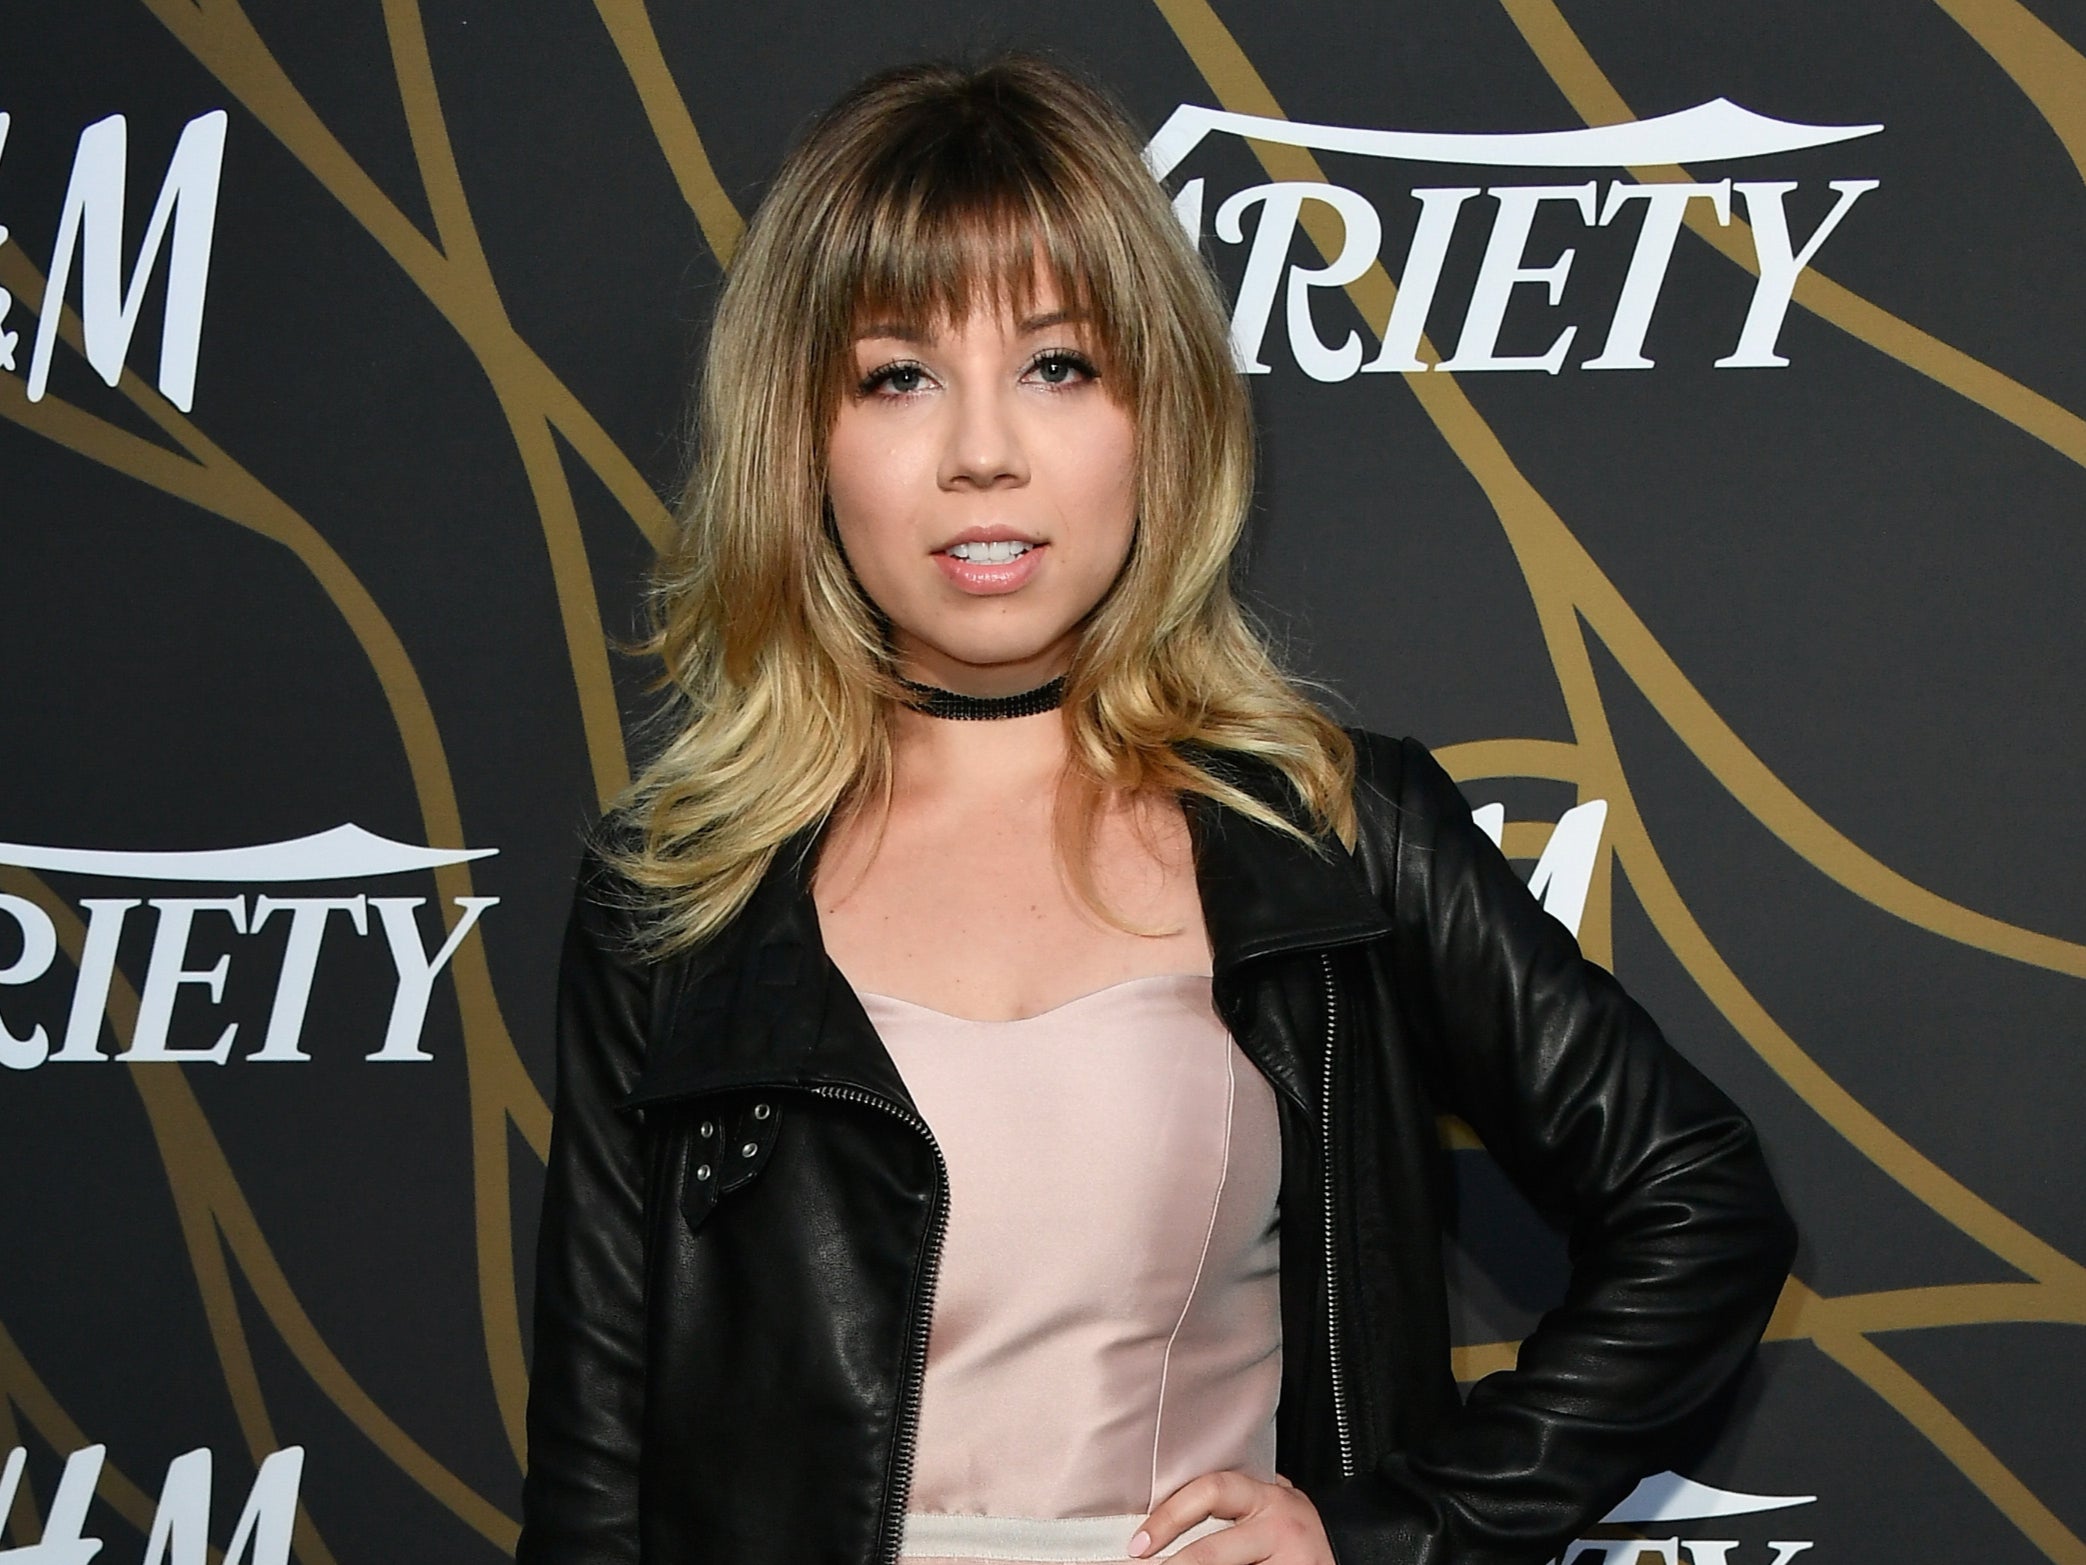 Lansky interviewed Jennette McCurdy about her troubled childhood